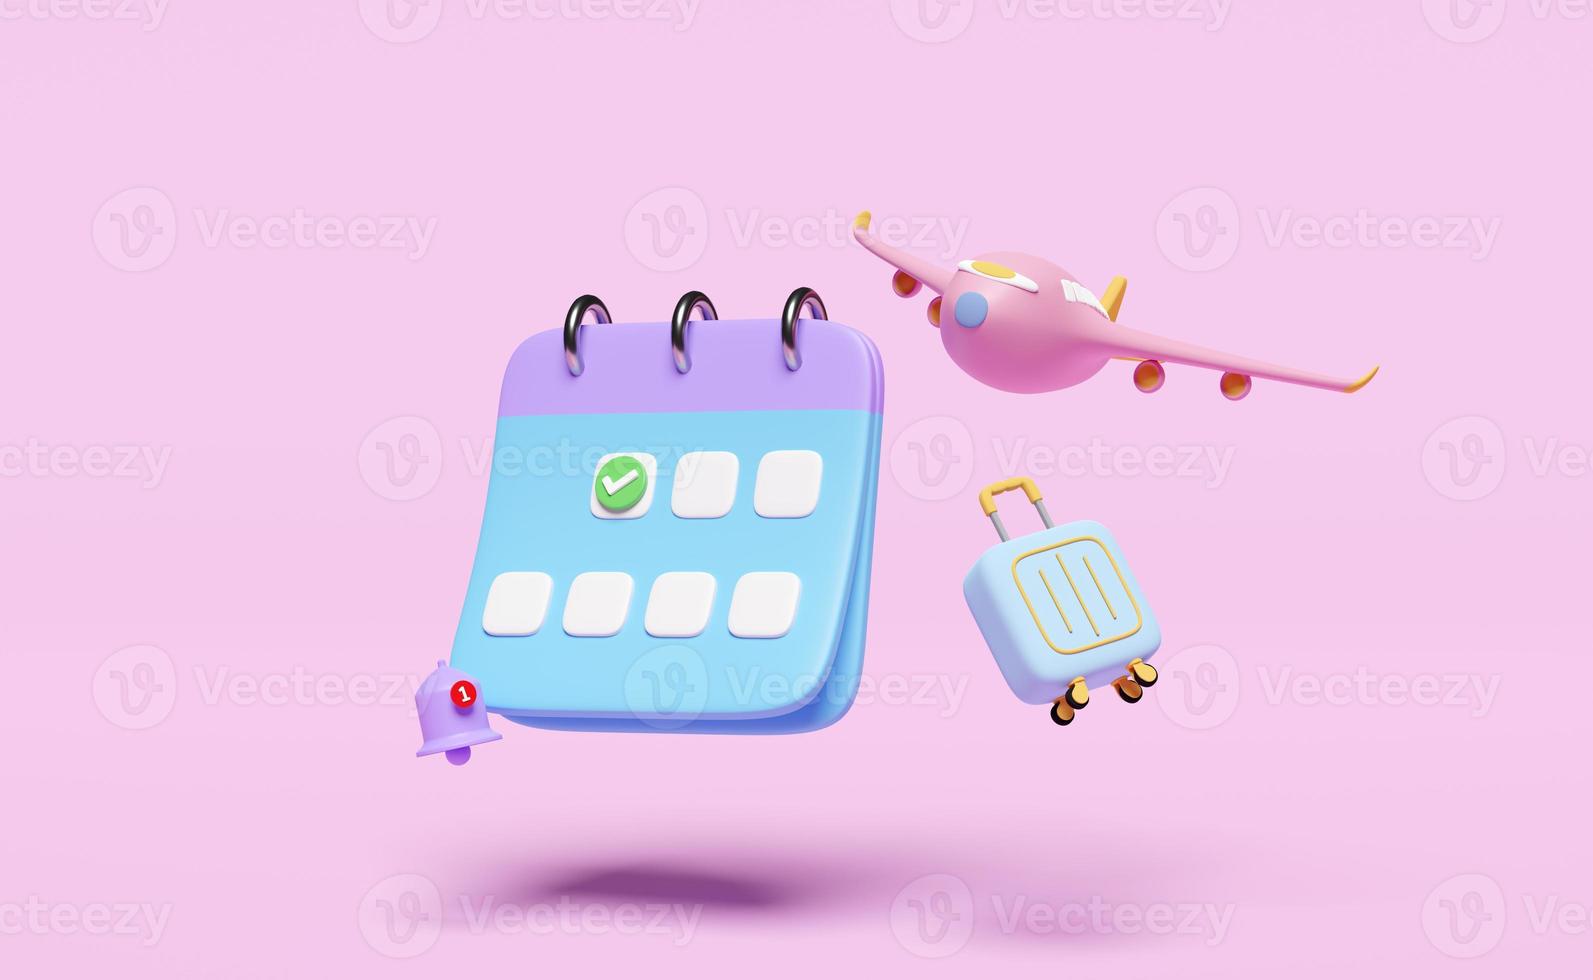 3d calendar with suitcase, airplane, checkmark icons, marked date, notification bell flight isolated on pink background. schedule appointment, summer travel, itinerary concept, 3d render illustration photo